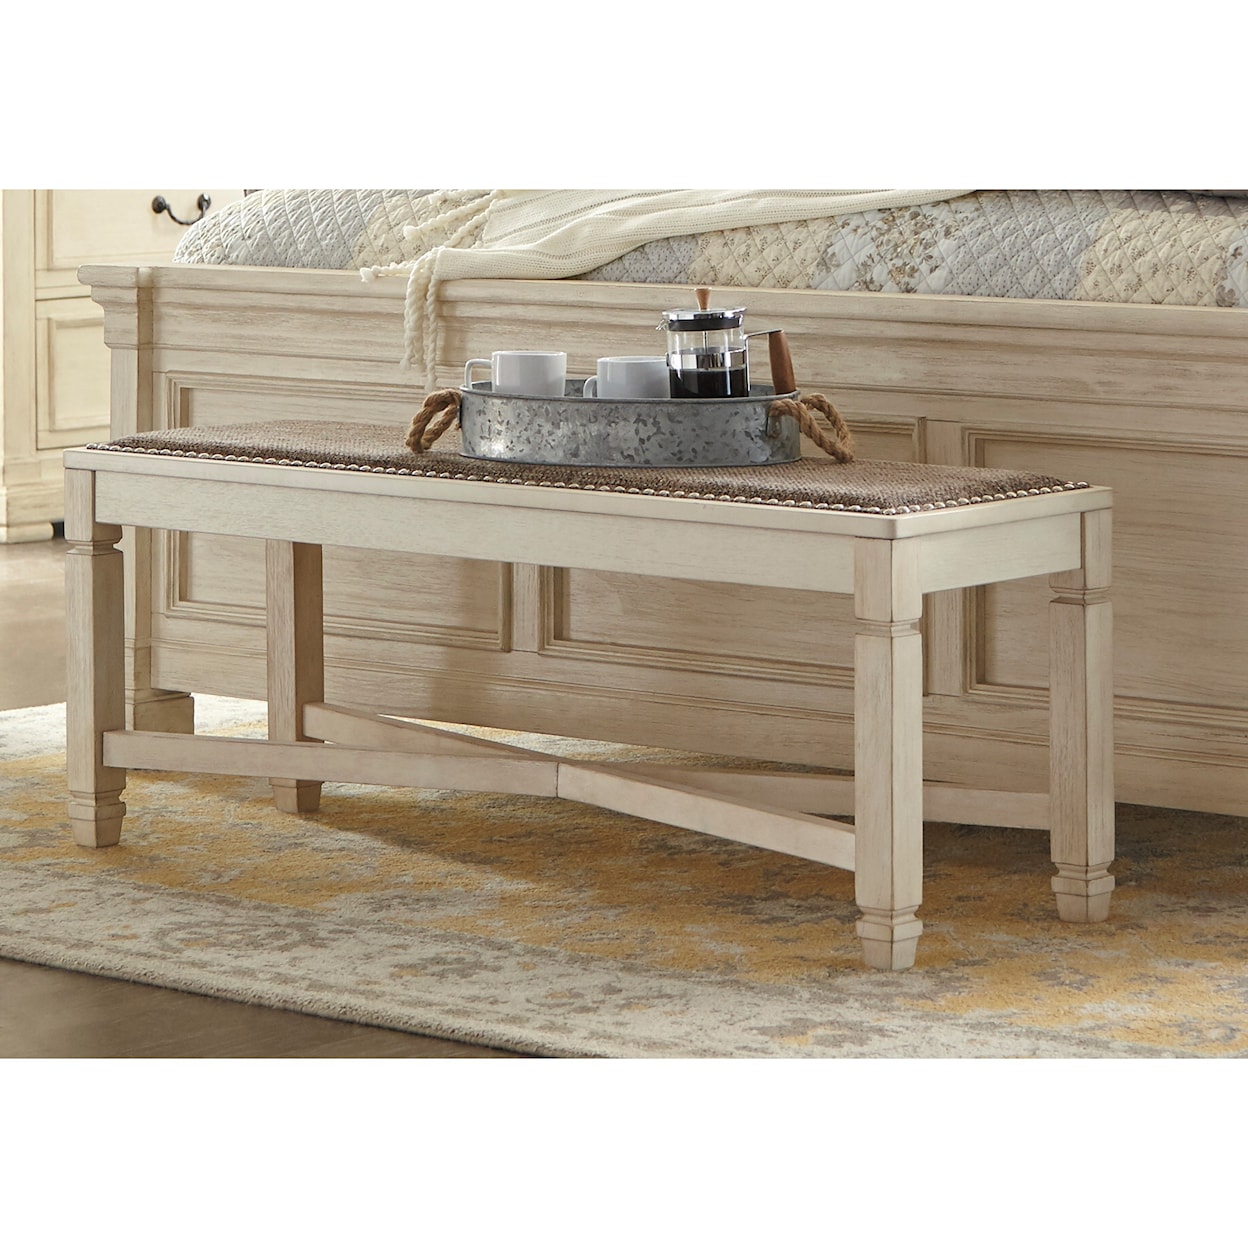 Signature Design by Ashley Furniture Bolanburg Upholstered Dining Room Bench